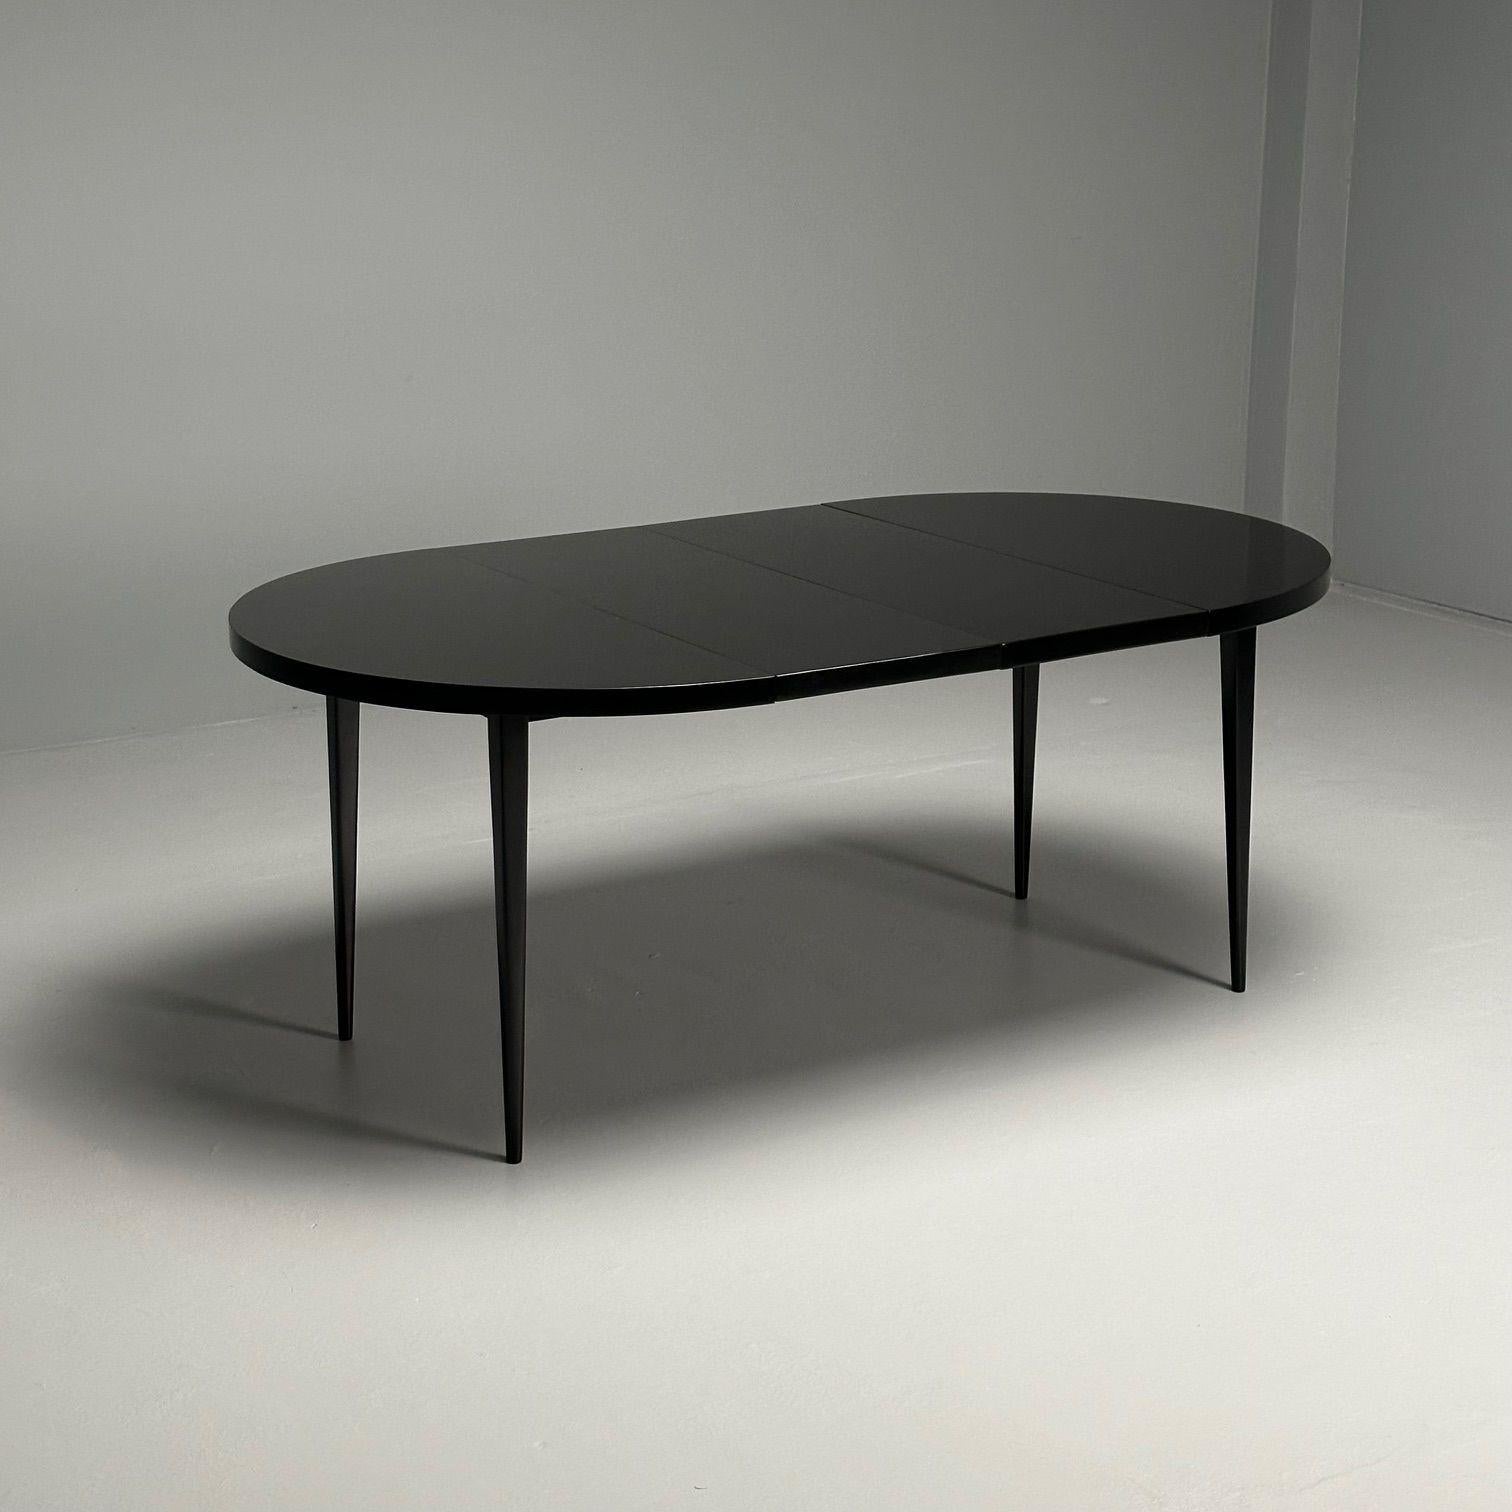 Paul McCobb, Mid-Century Modern Planner Group Dining Table, Black Lacquer, 1950s

A beautifully restored and lacquered Paul McCobb (1917-1969) for Winchendon 'Planner Group' Dining Table, Winchendon, Massachusetts, c. 1950. The table bears the